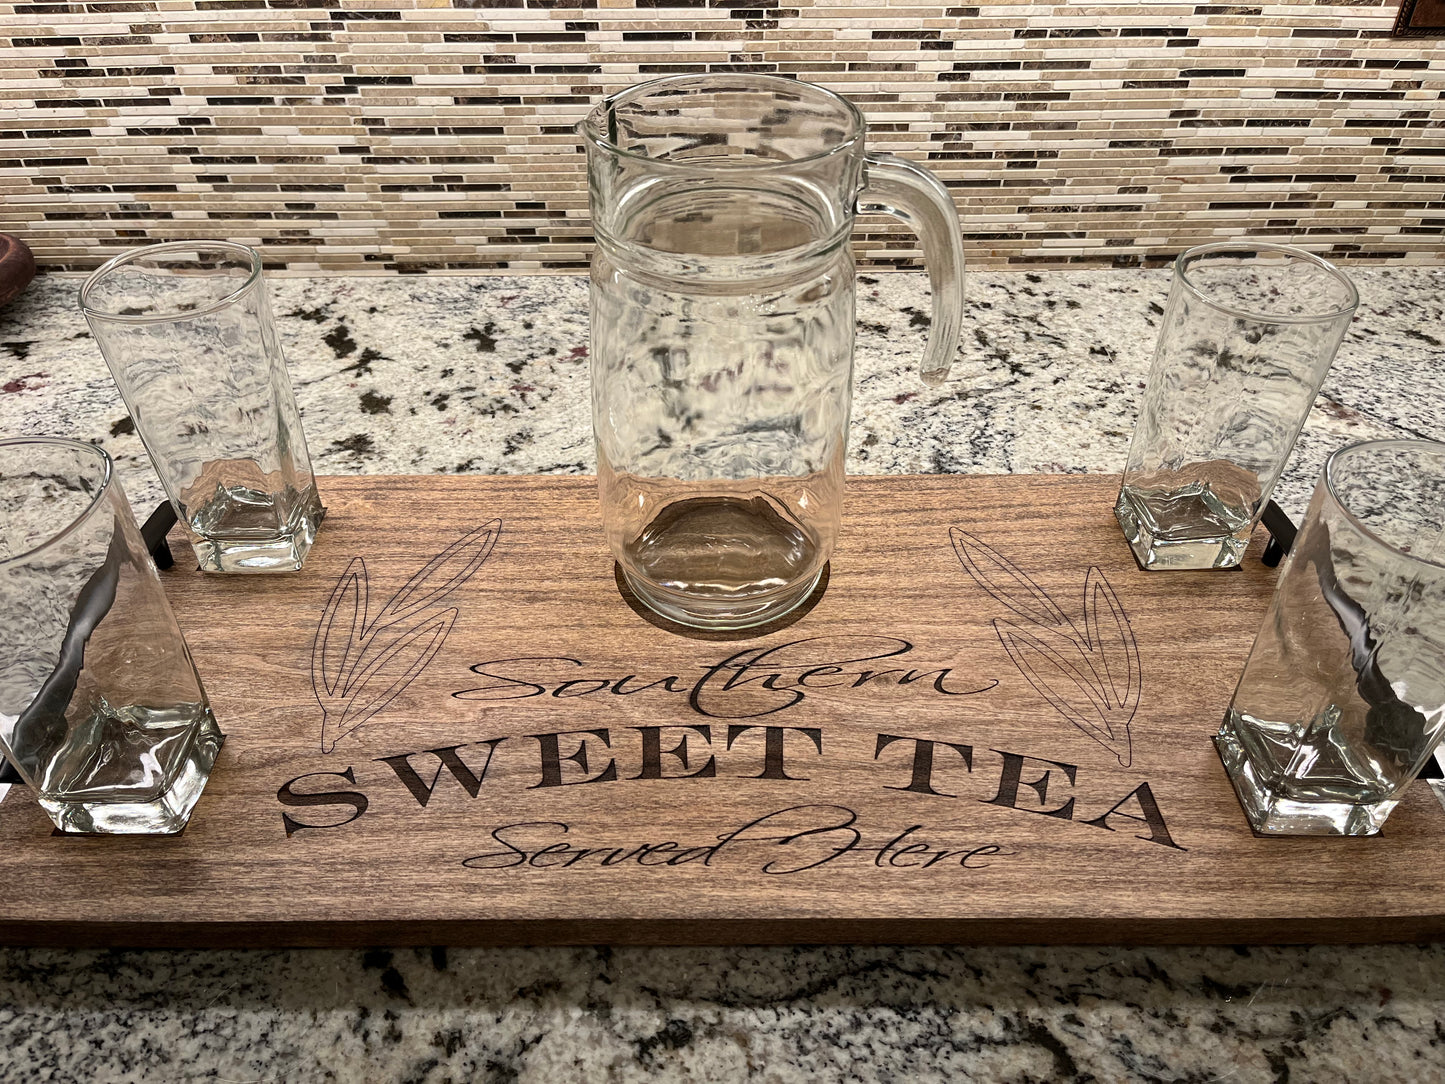 Southern Sweet Tea Served Here Tray